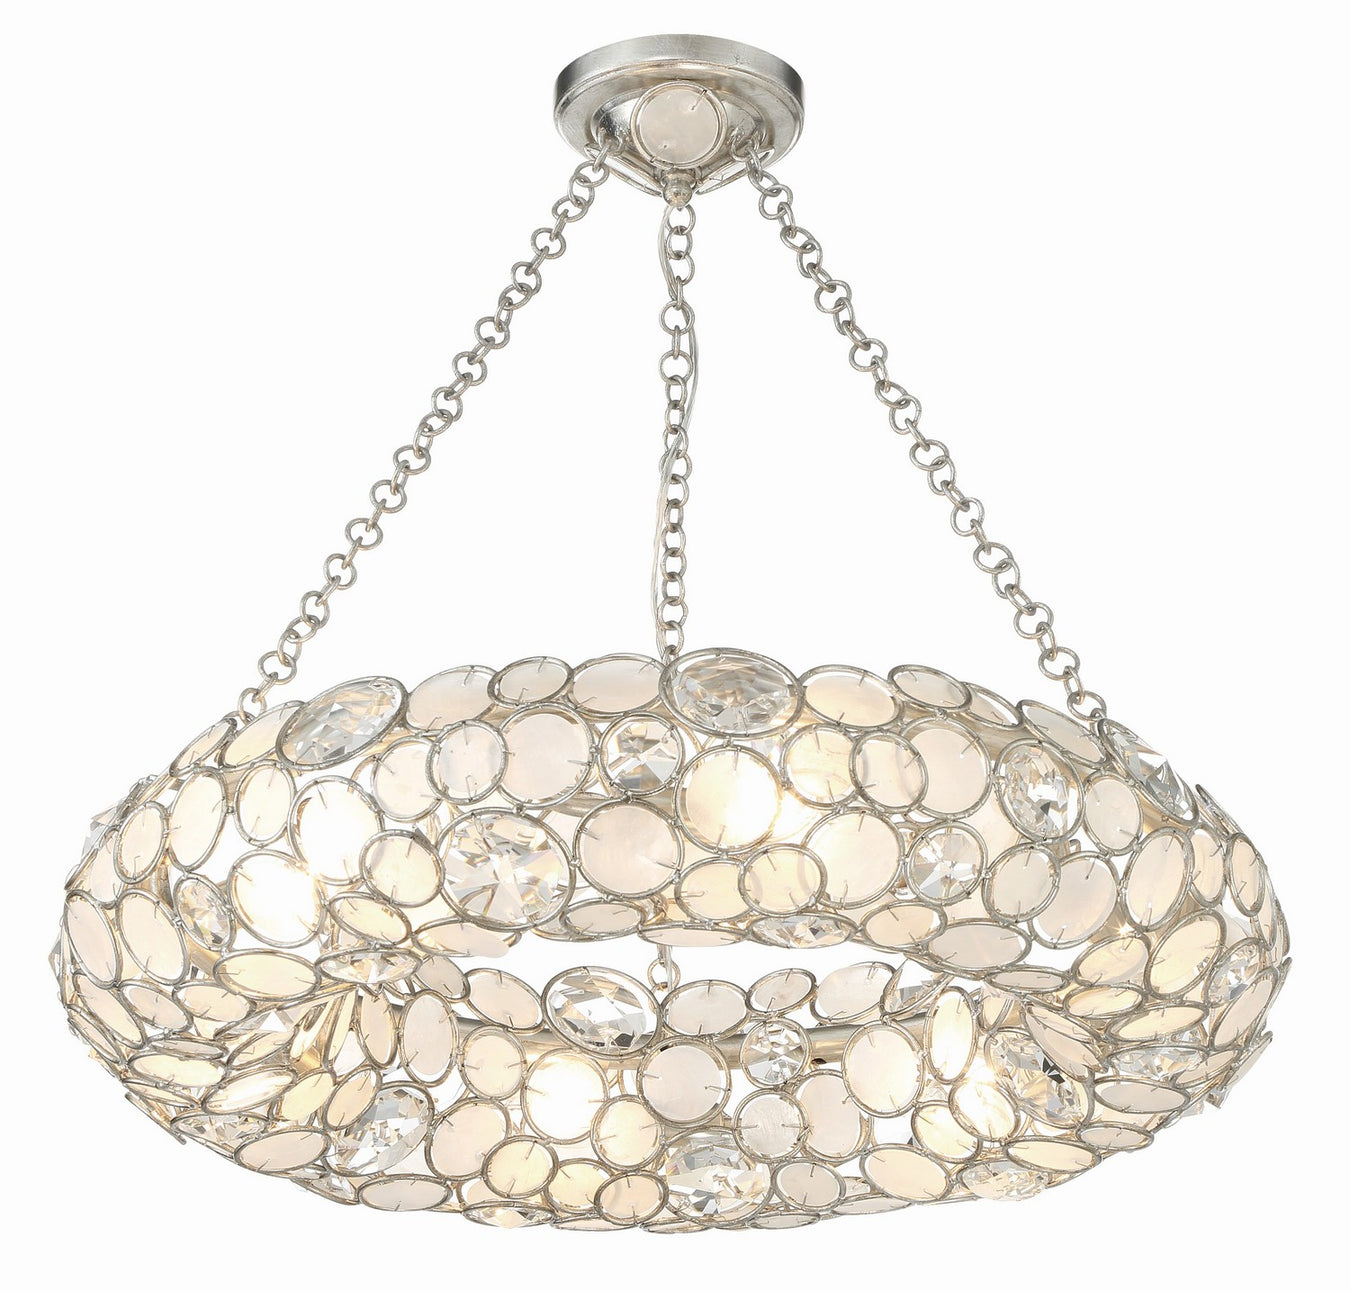 Palla 6-Light Chandelier in Antique Silver by Crystorama - MPN 525-SA